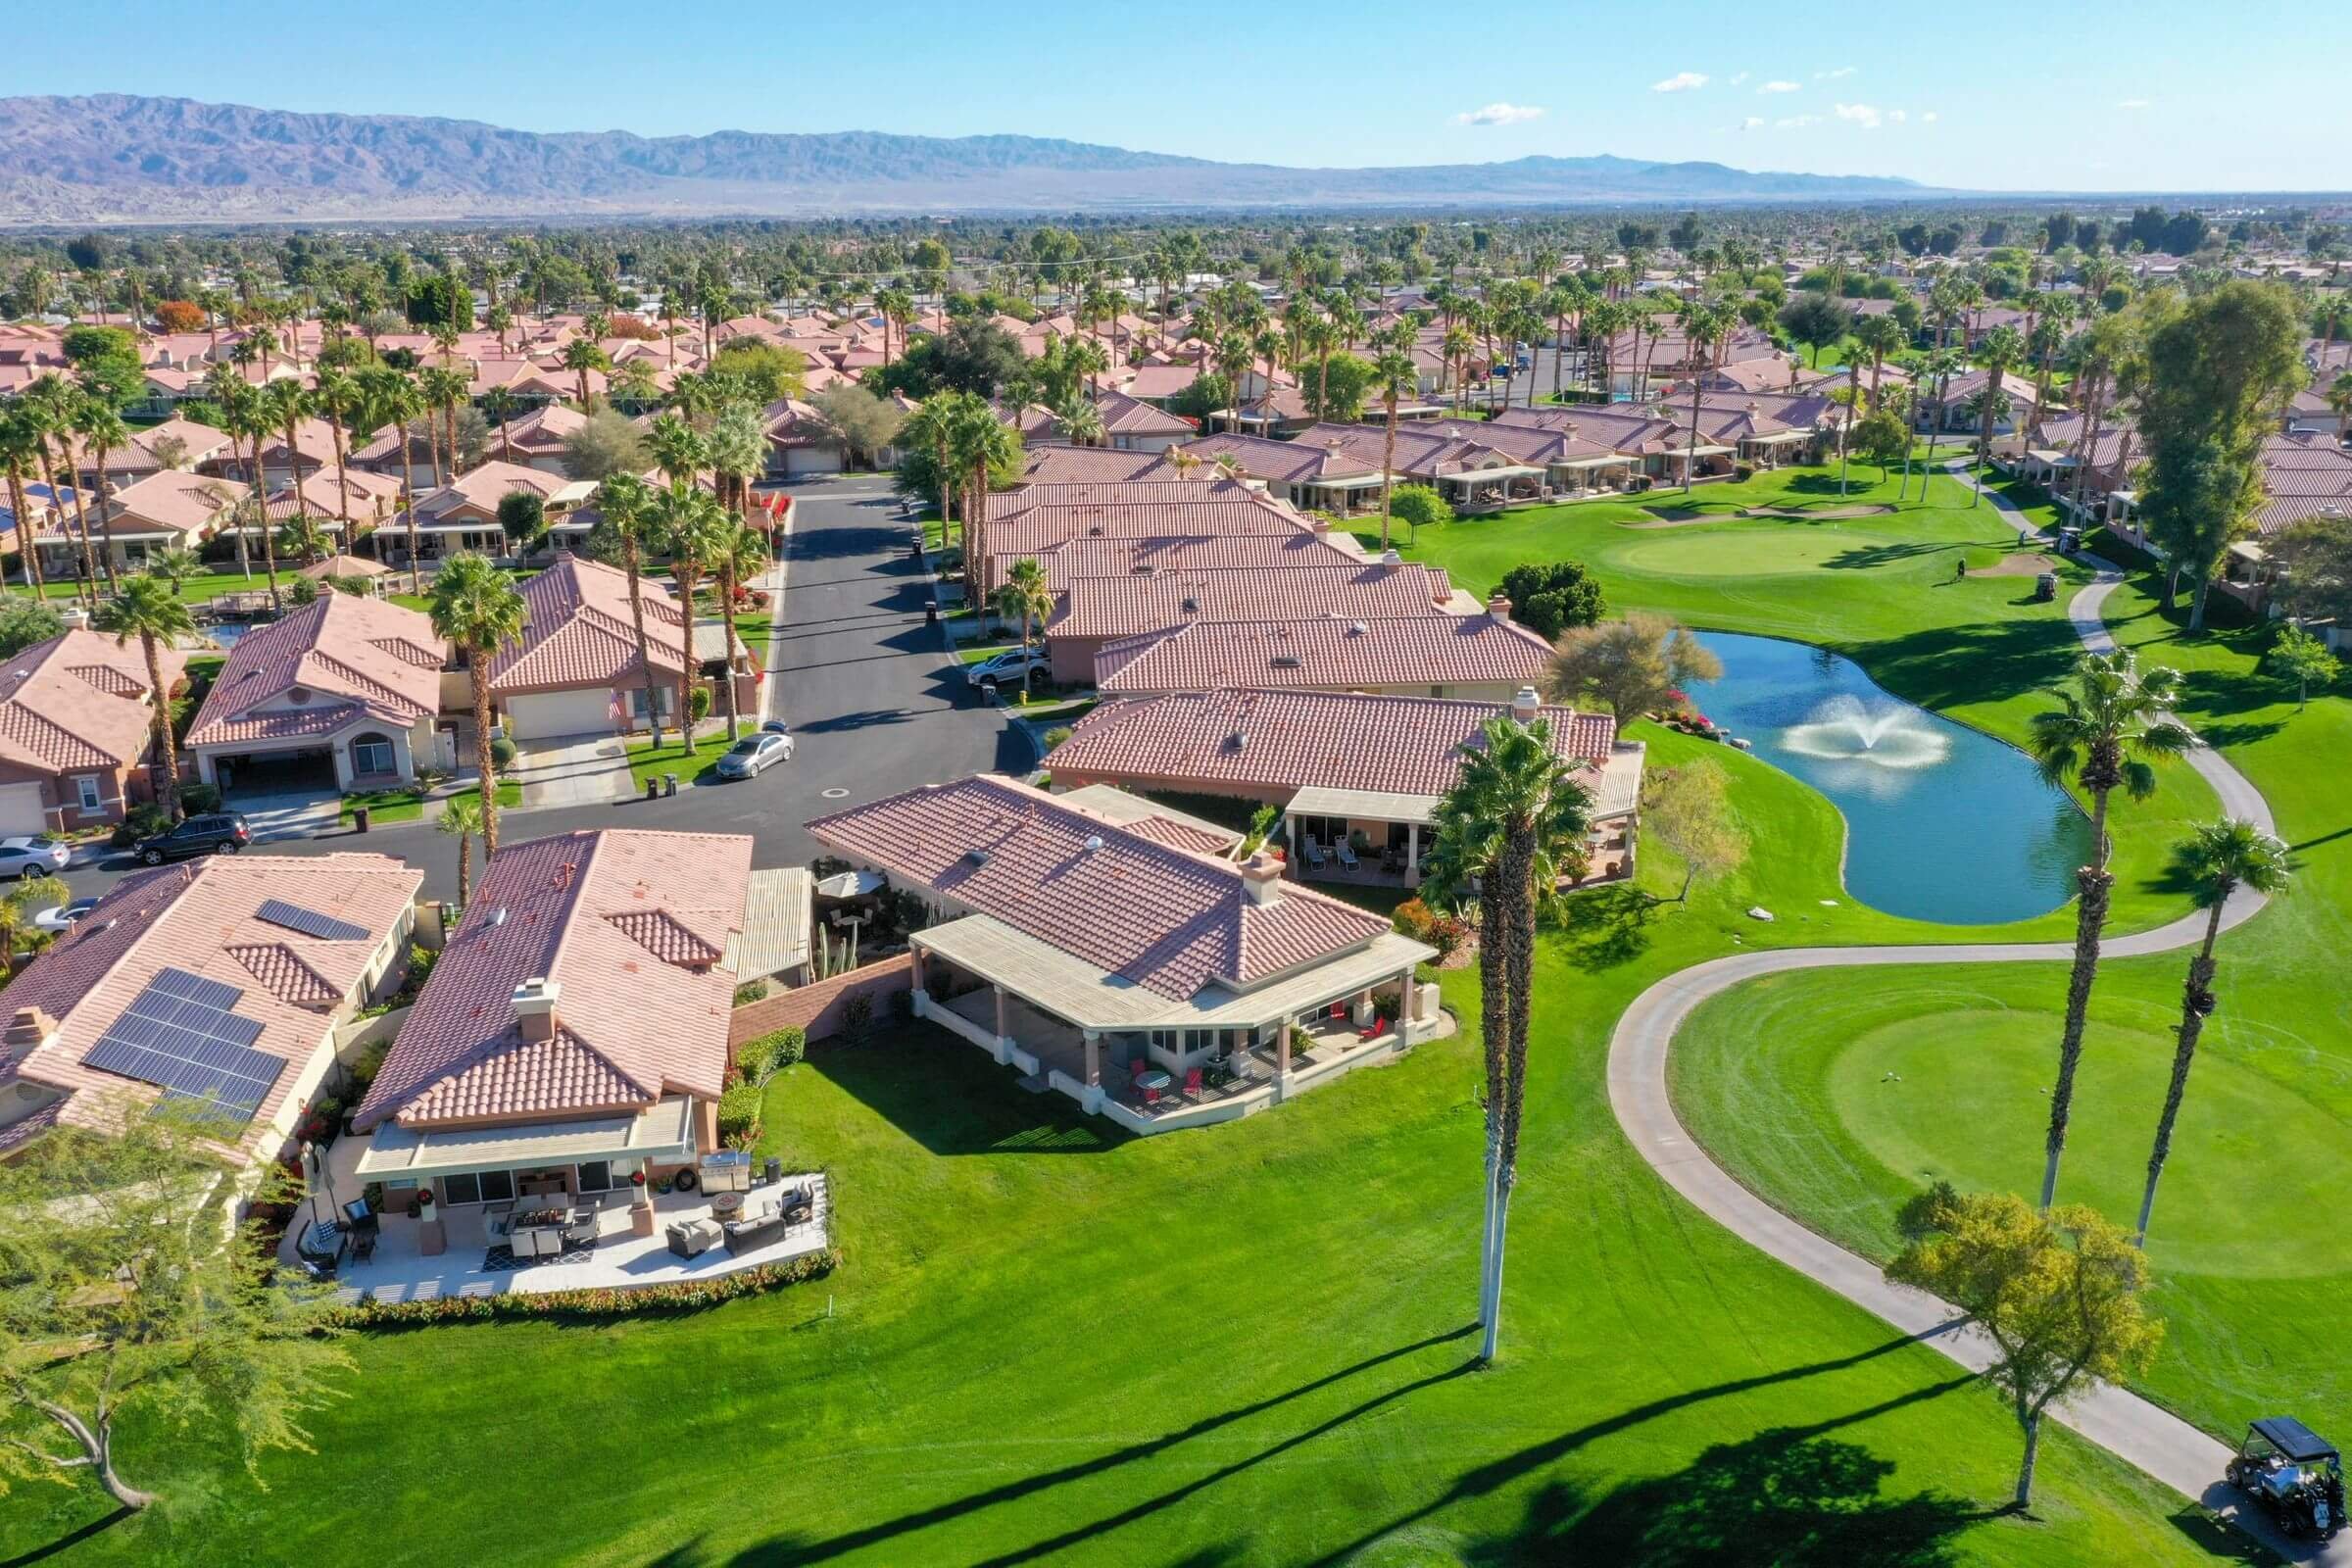 Oasis Country Club Palm Desert 92211